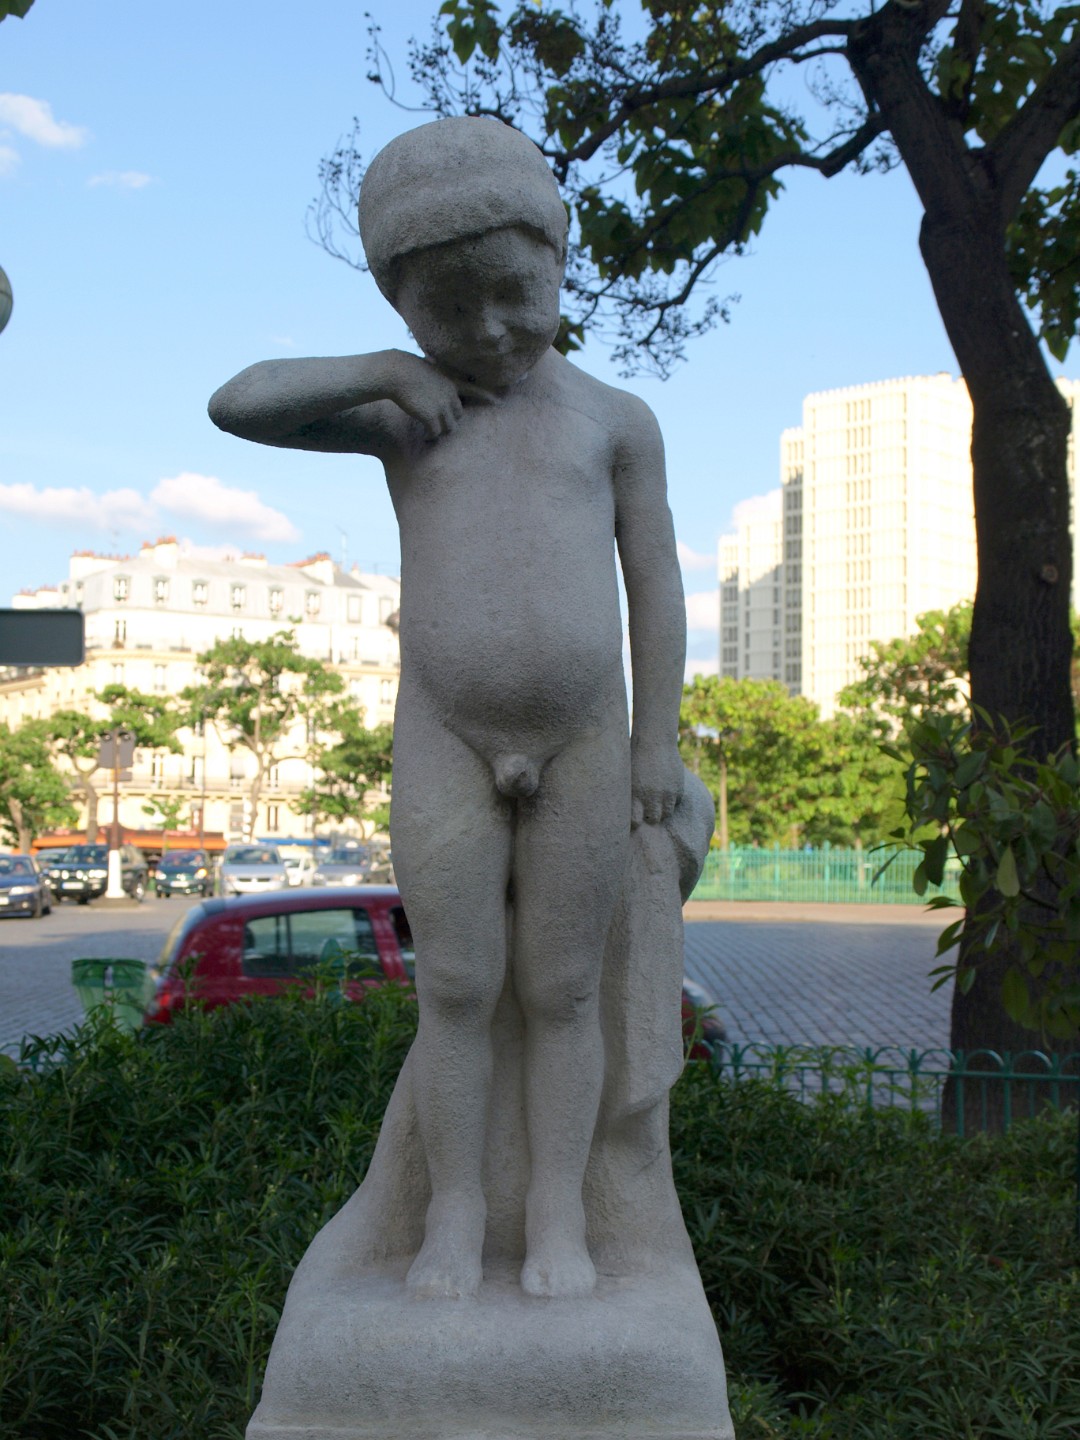 Detail of the Little Boy Statue